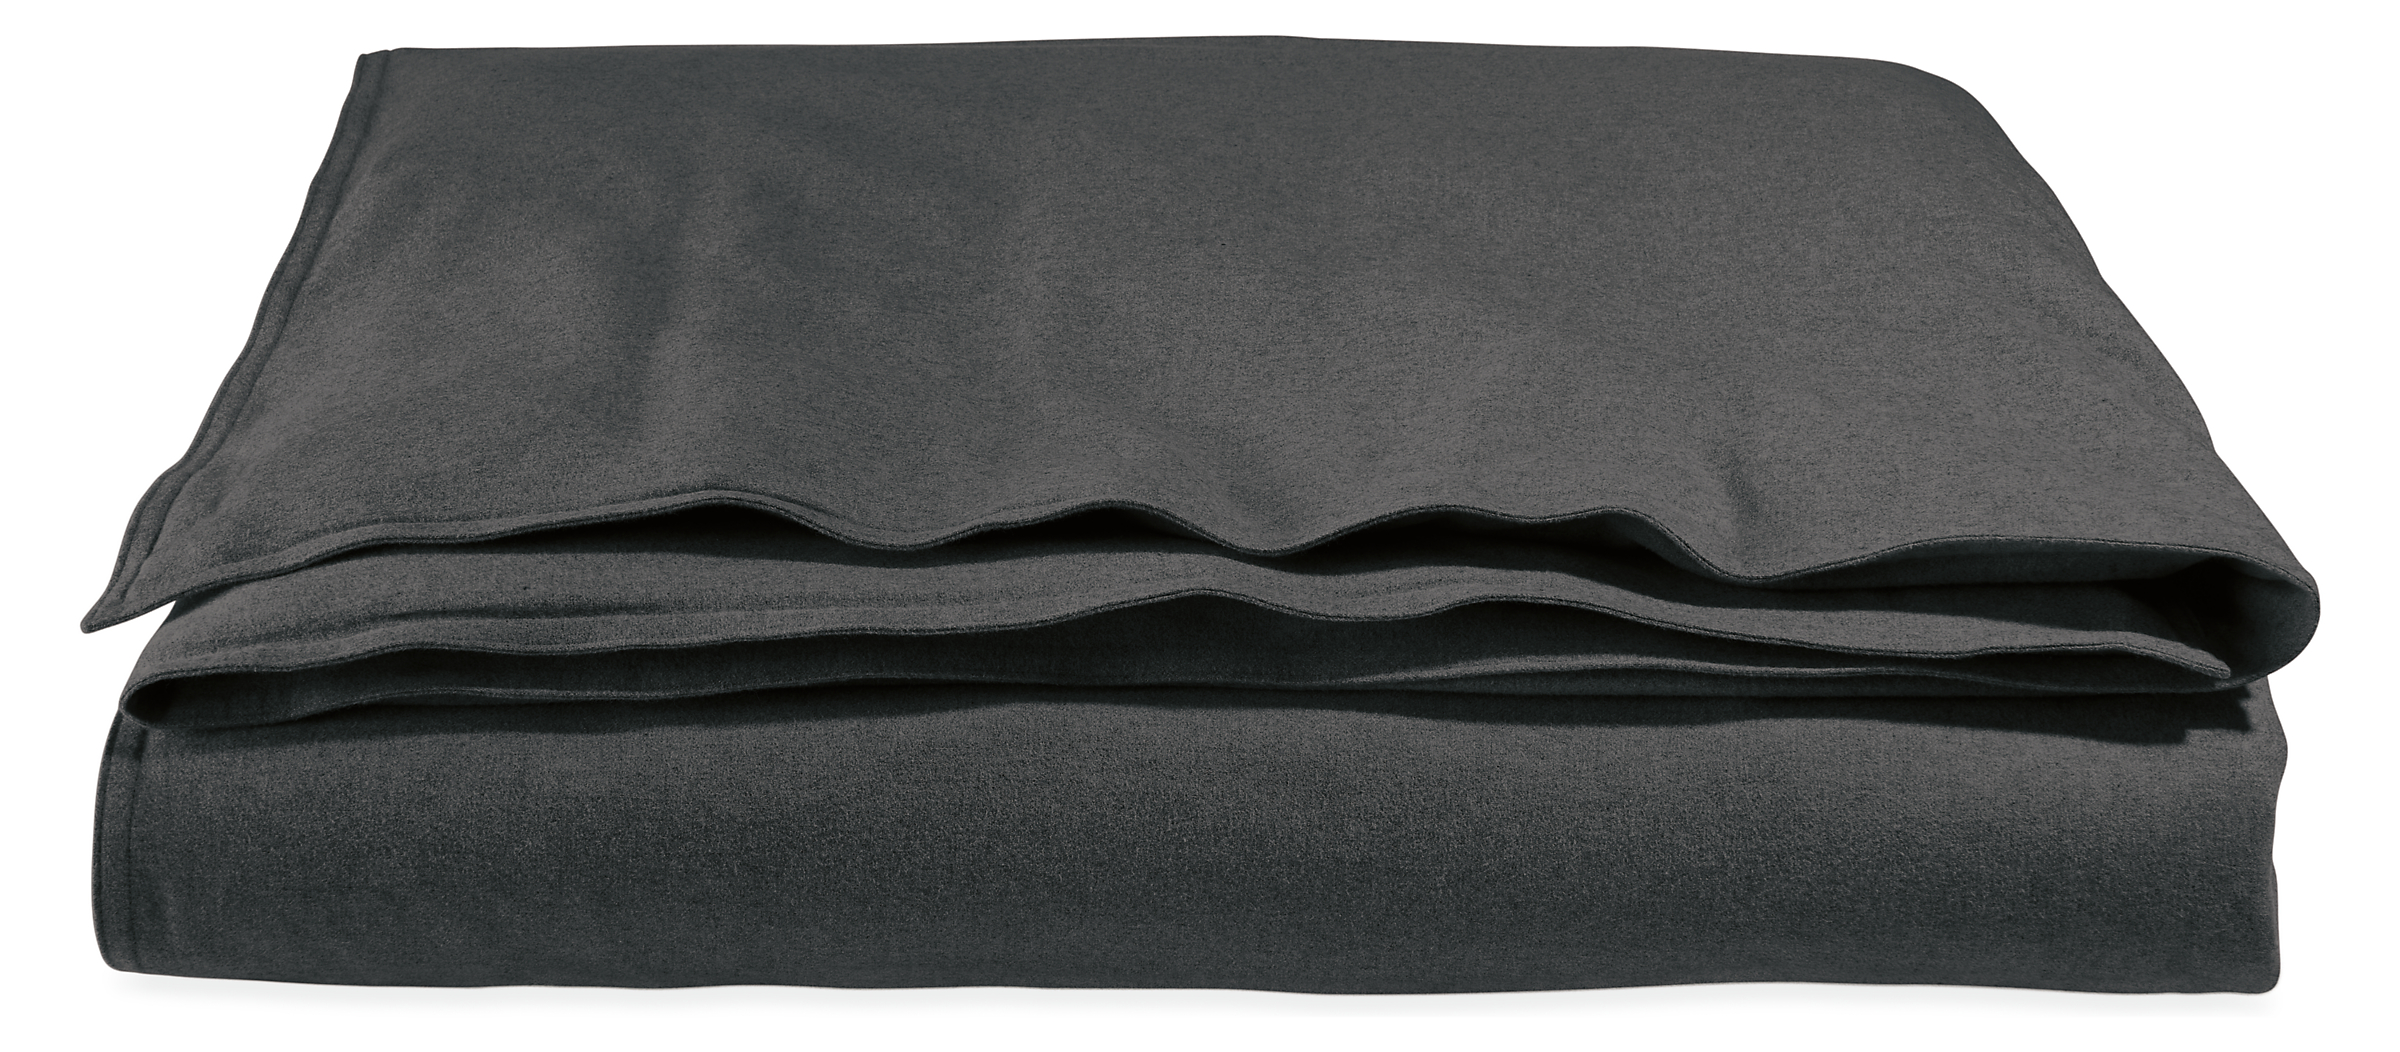 Heathered Flannel King Duvet Cover in Charcoal